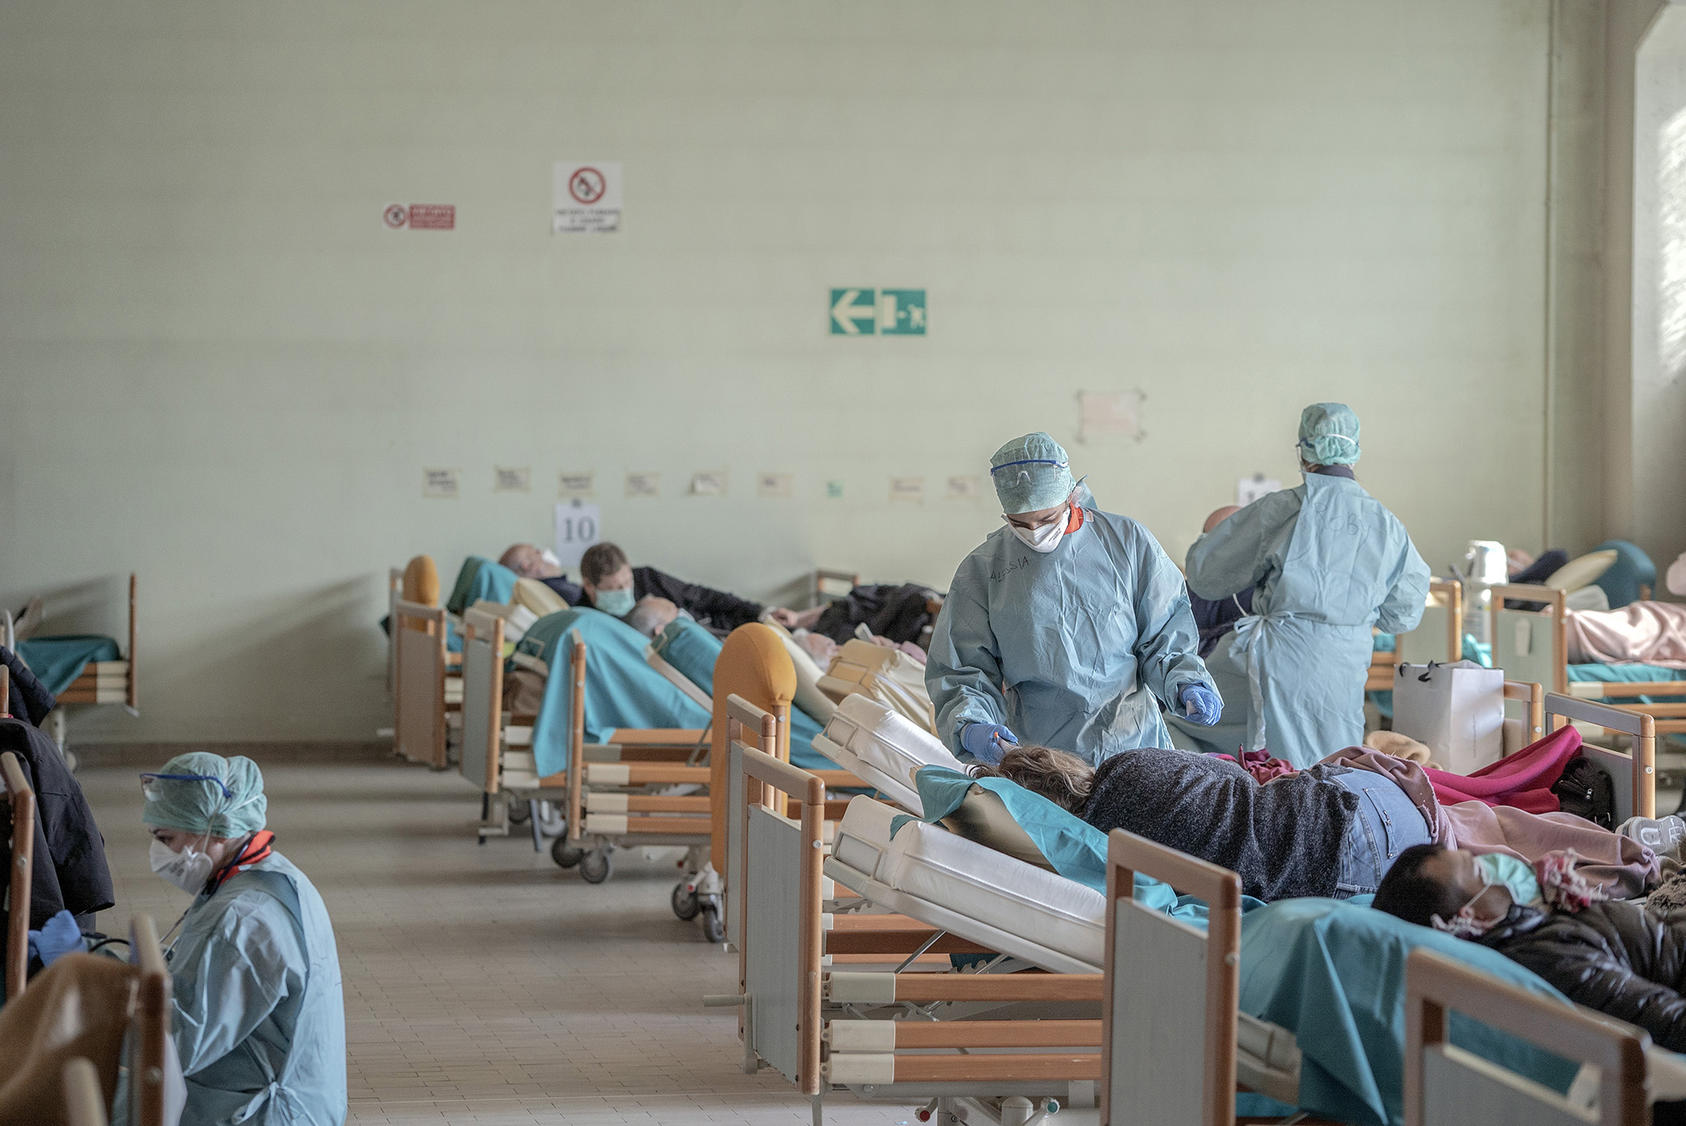 The laundry area of a hospital in Brescia, Italy, filled with beds for patients waiting to be tested for the coronavirus, Monday, March 16, 2020. These types of facilities are largely unavailable in refugee camps. (Alessandro Grassani/The New York Times)